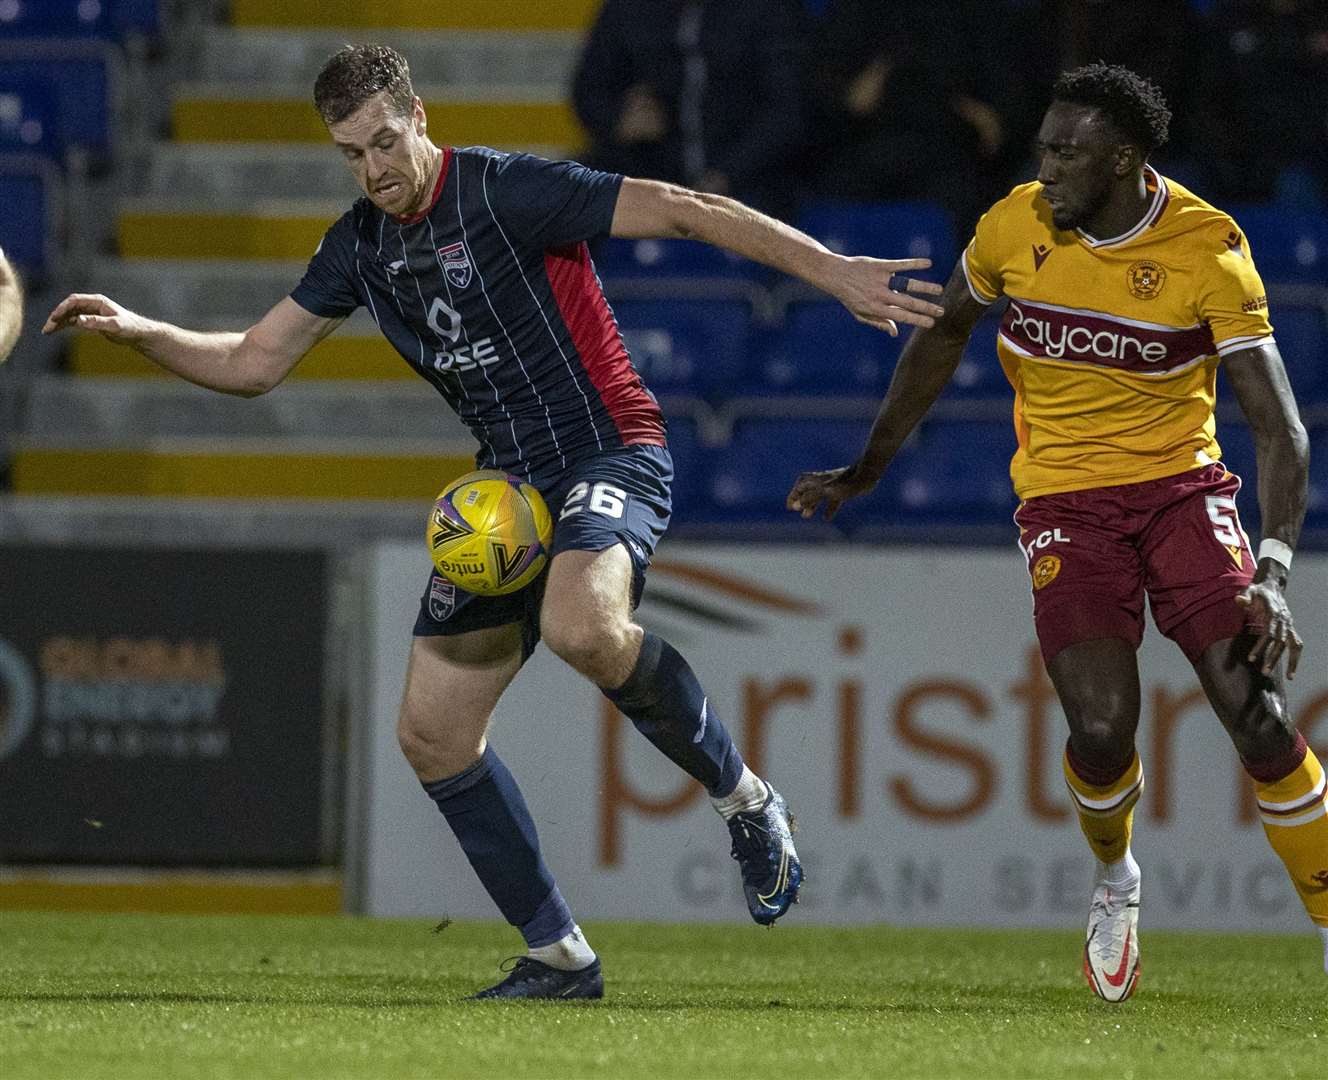 Picture - Ken Macpherson. Ross County(3) v Motherwell(1). 18.01.22. Ross County's Jordan White gets away from Motherwell's Bevis Mugabi.